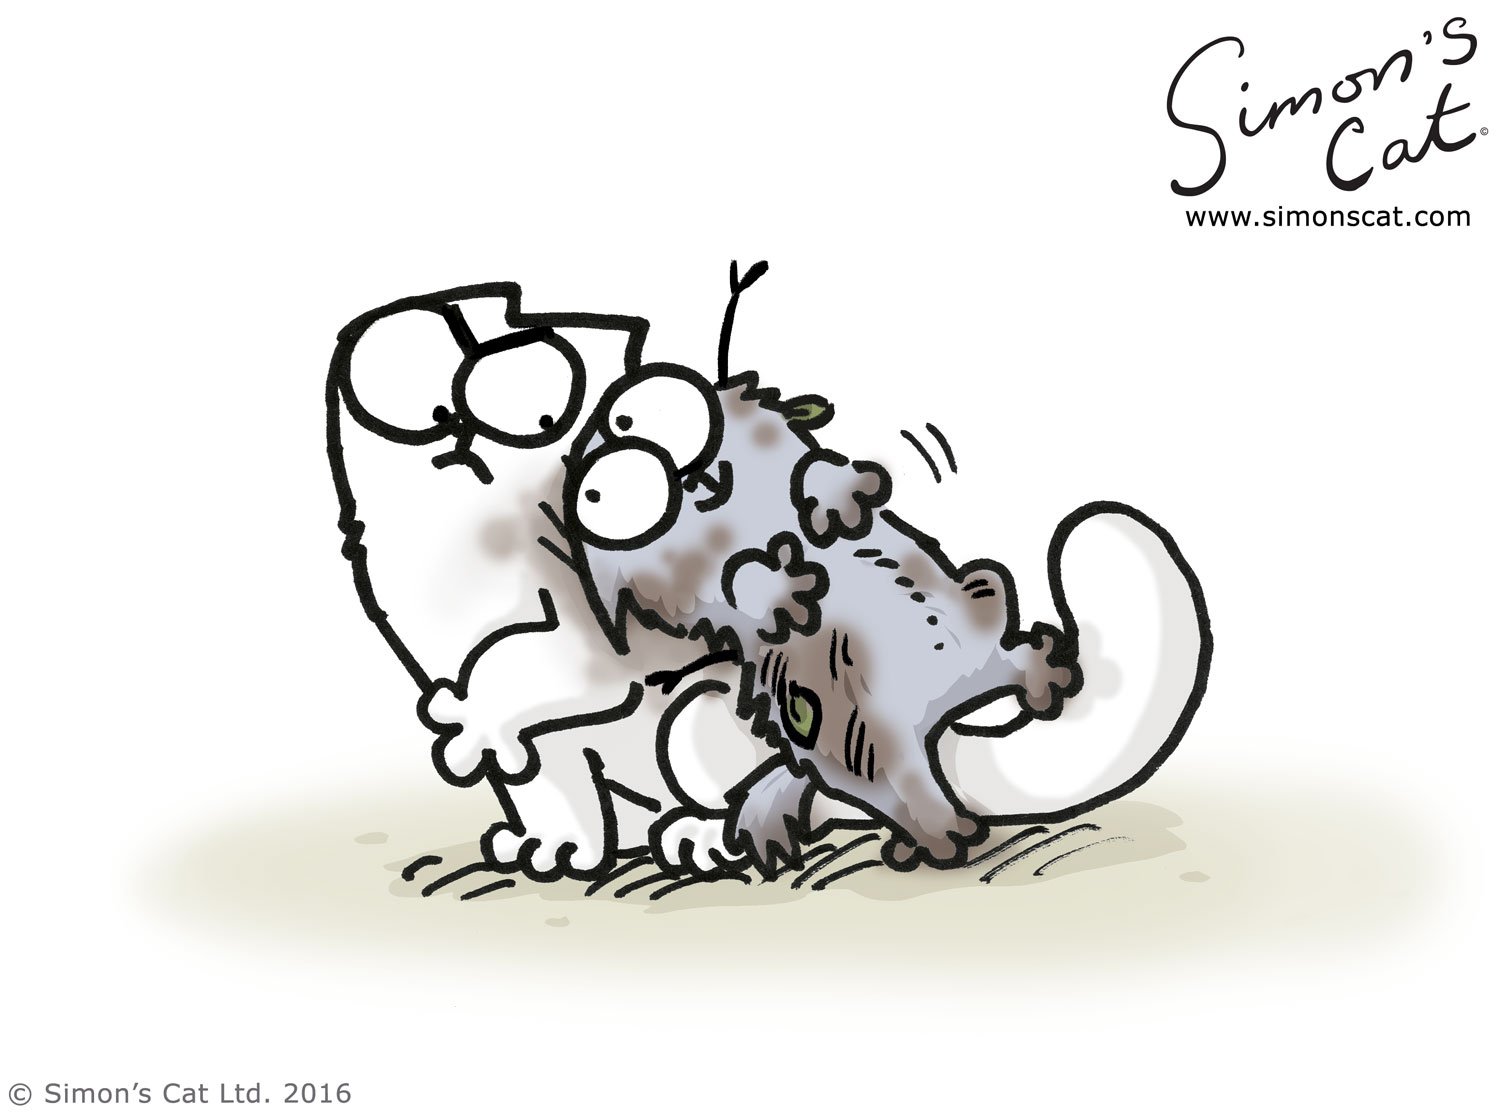 Simon's Cat 🐾 on X: Simon's Cat and kitten are making a mess in